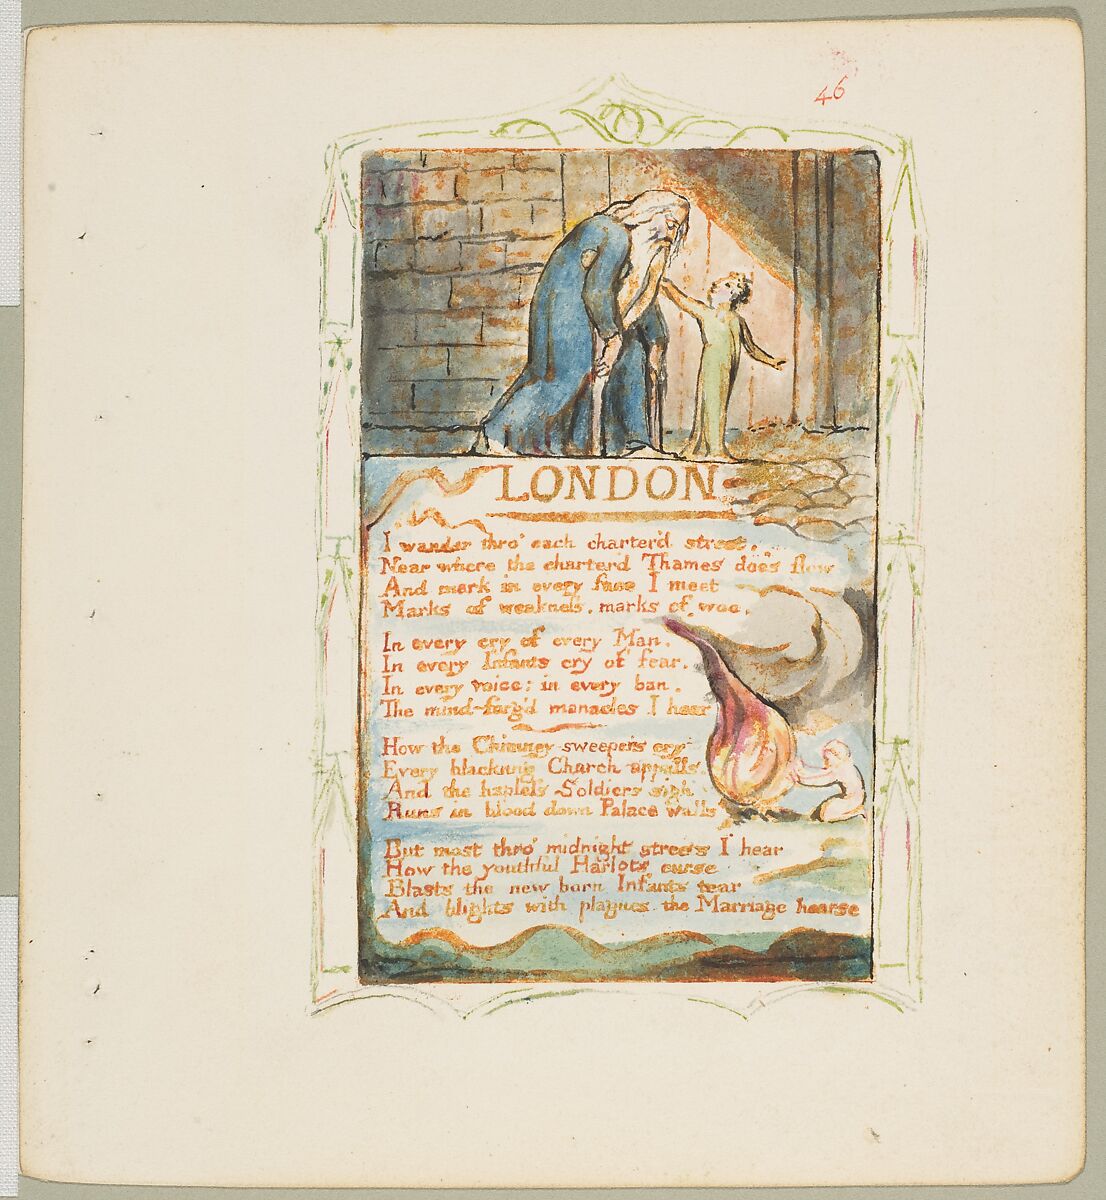 Songs of Experience: London, William Blake  British, Relief etching printed in orange-brown ink and hand-colored with watercolor and shell gold